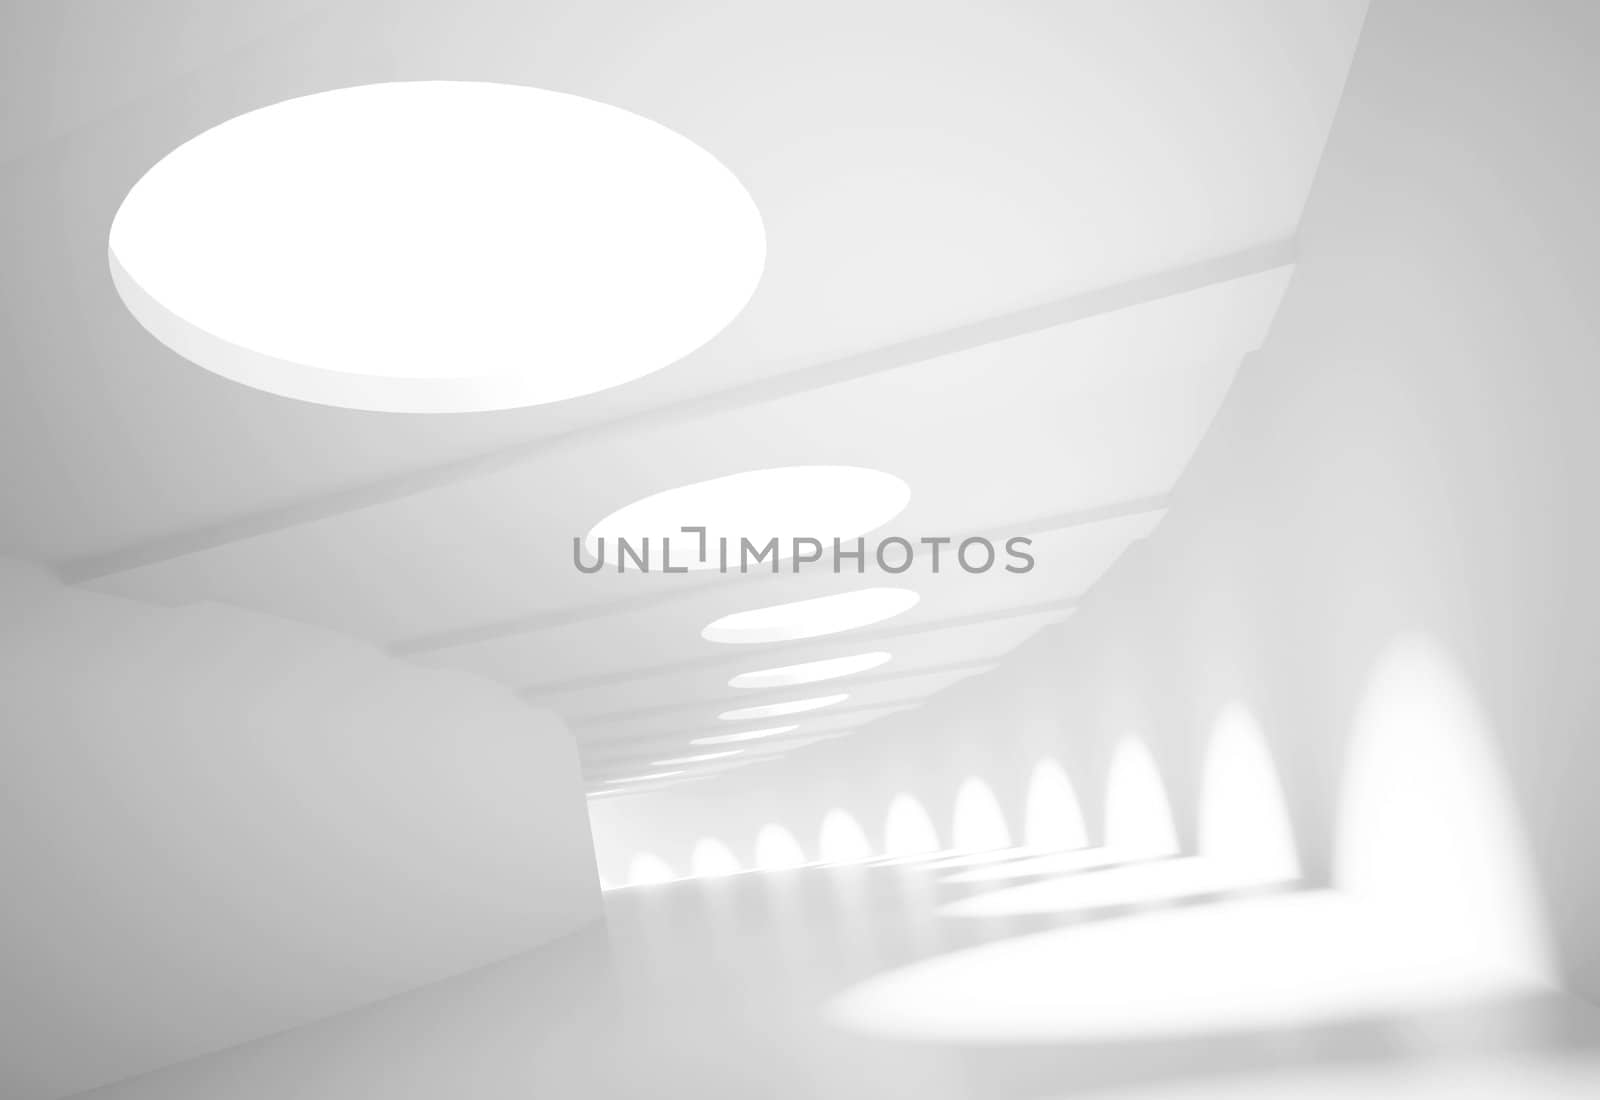 3d Illustration of White Empty Large Tunnel